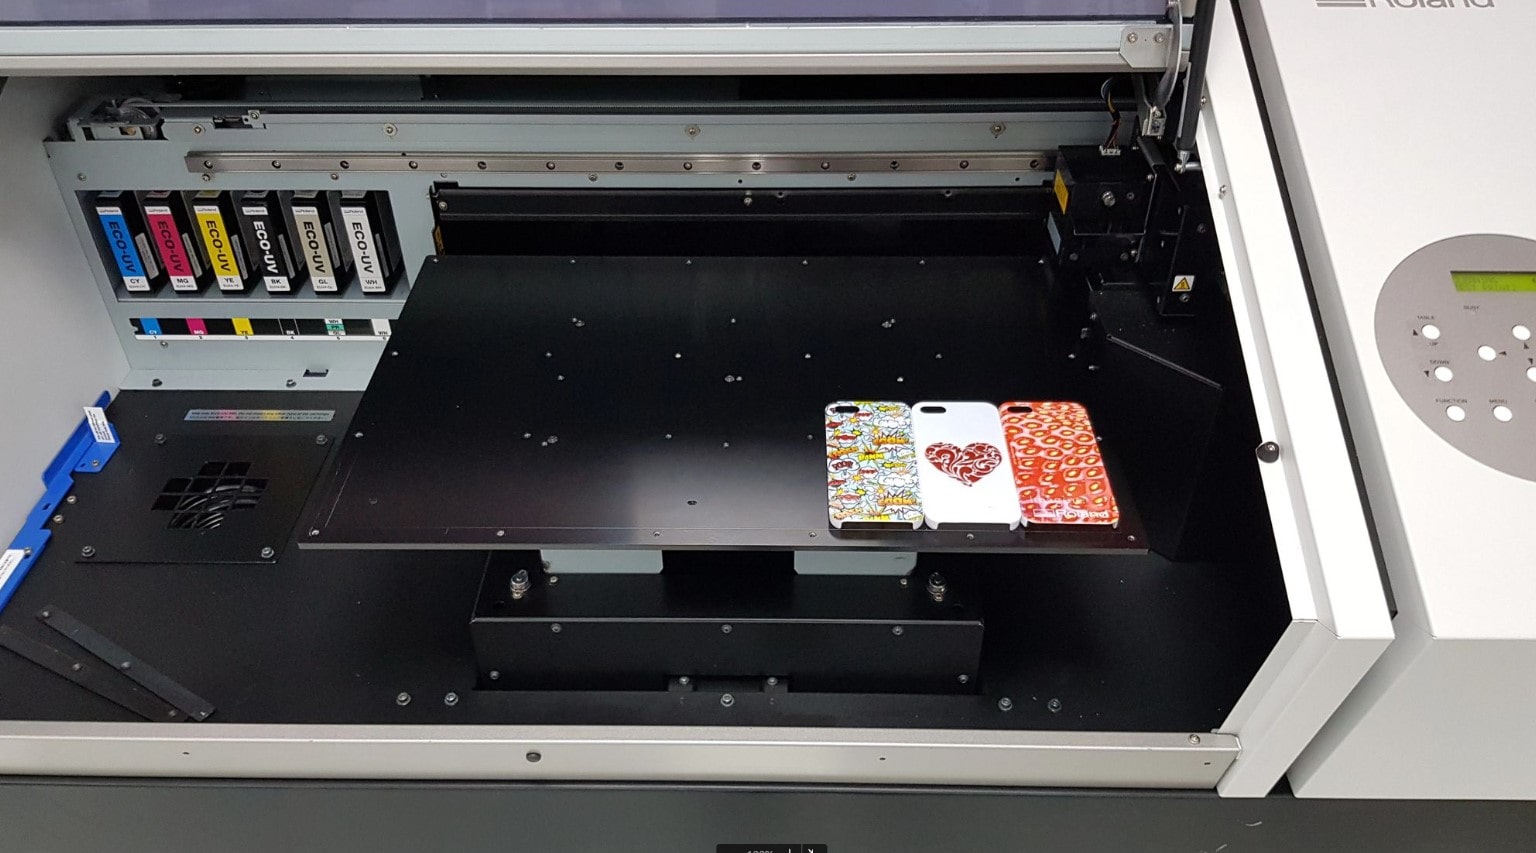 A UV printers with three different phones on top of it, ready to be printed upon.